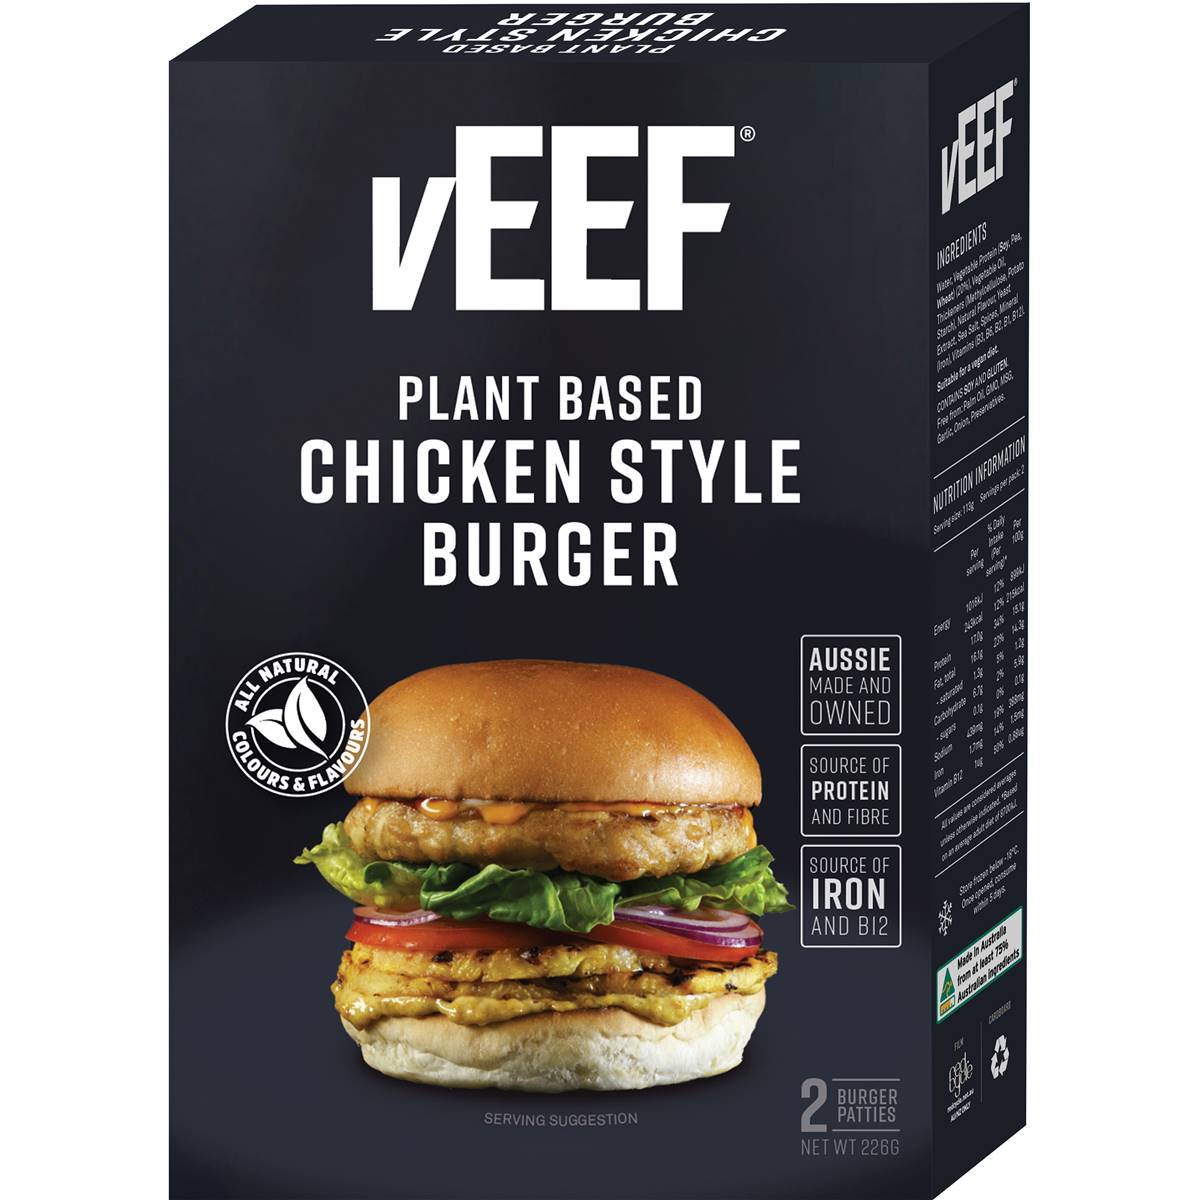 Calories in Veef Plant Based Chicken Style Burger